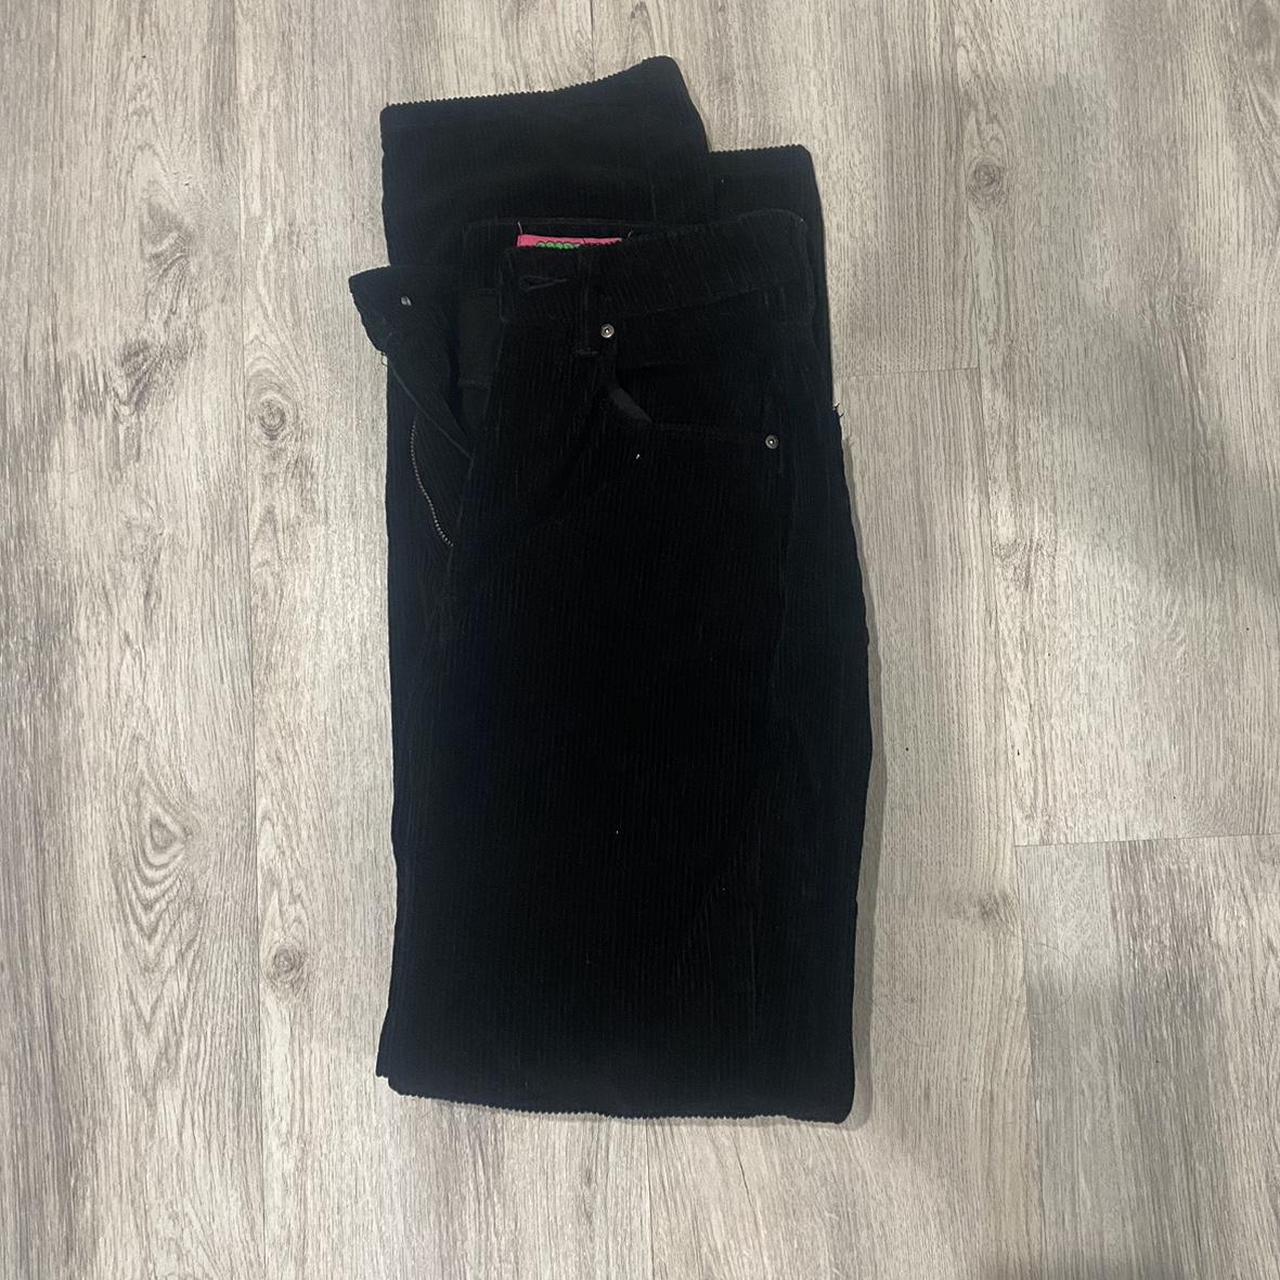 Brand new size small baggy corduroy empyre pants - Depop